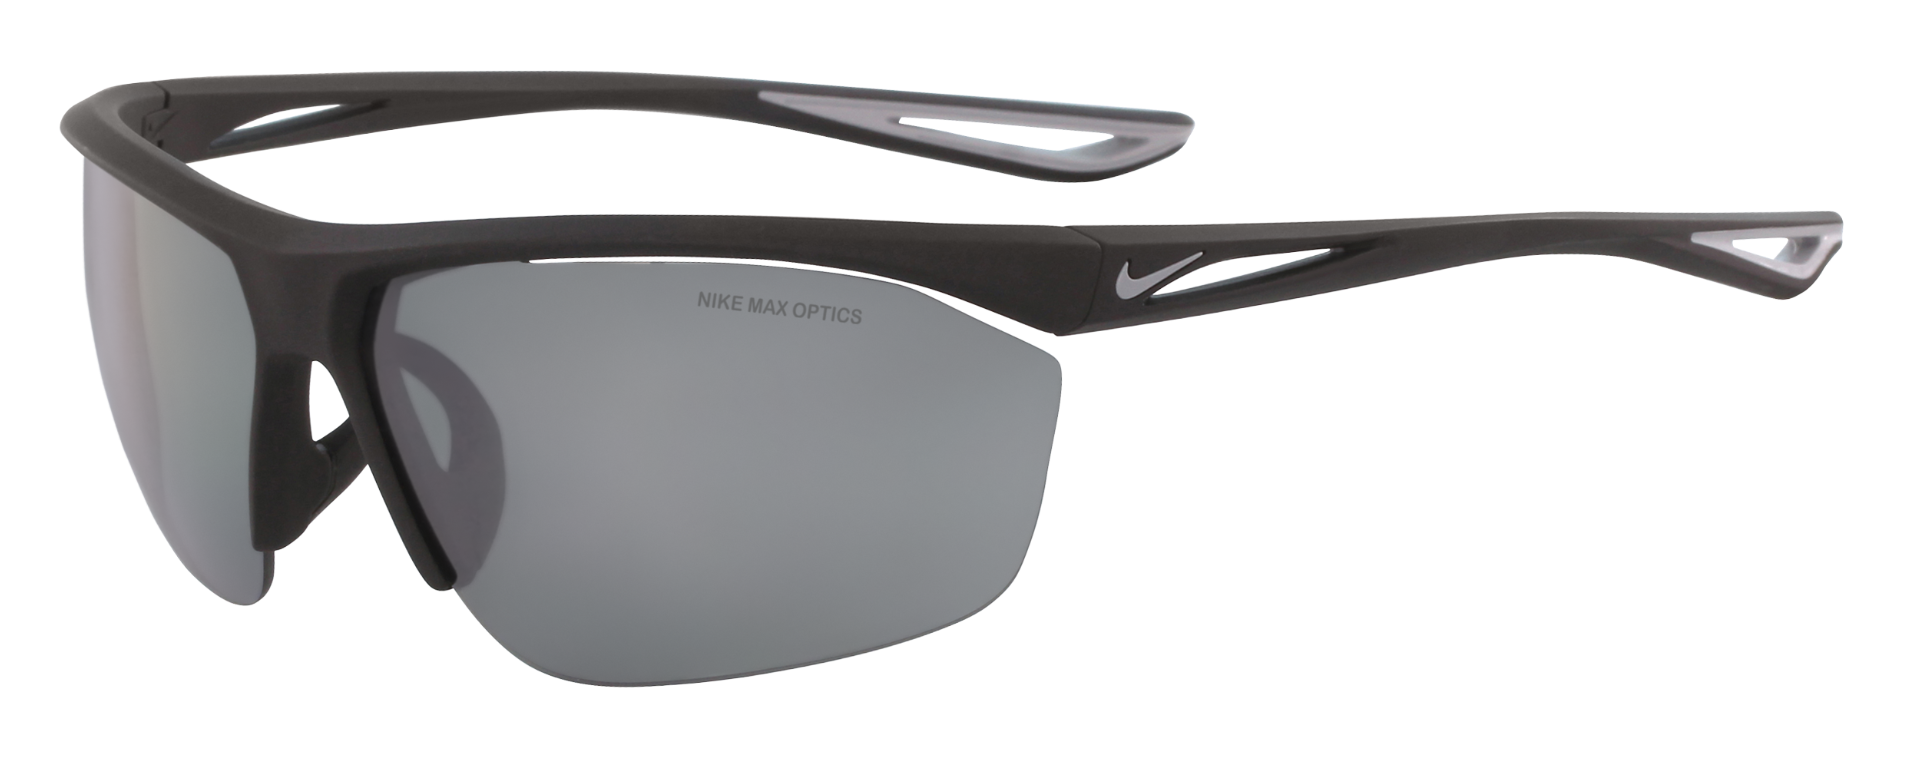 First frame in best Nike women's sunglasses list featuring the Tailwind S. Semi-rimless matte black frame with grey lenses.